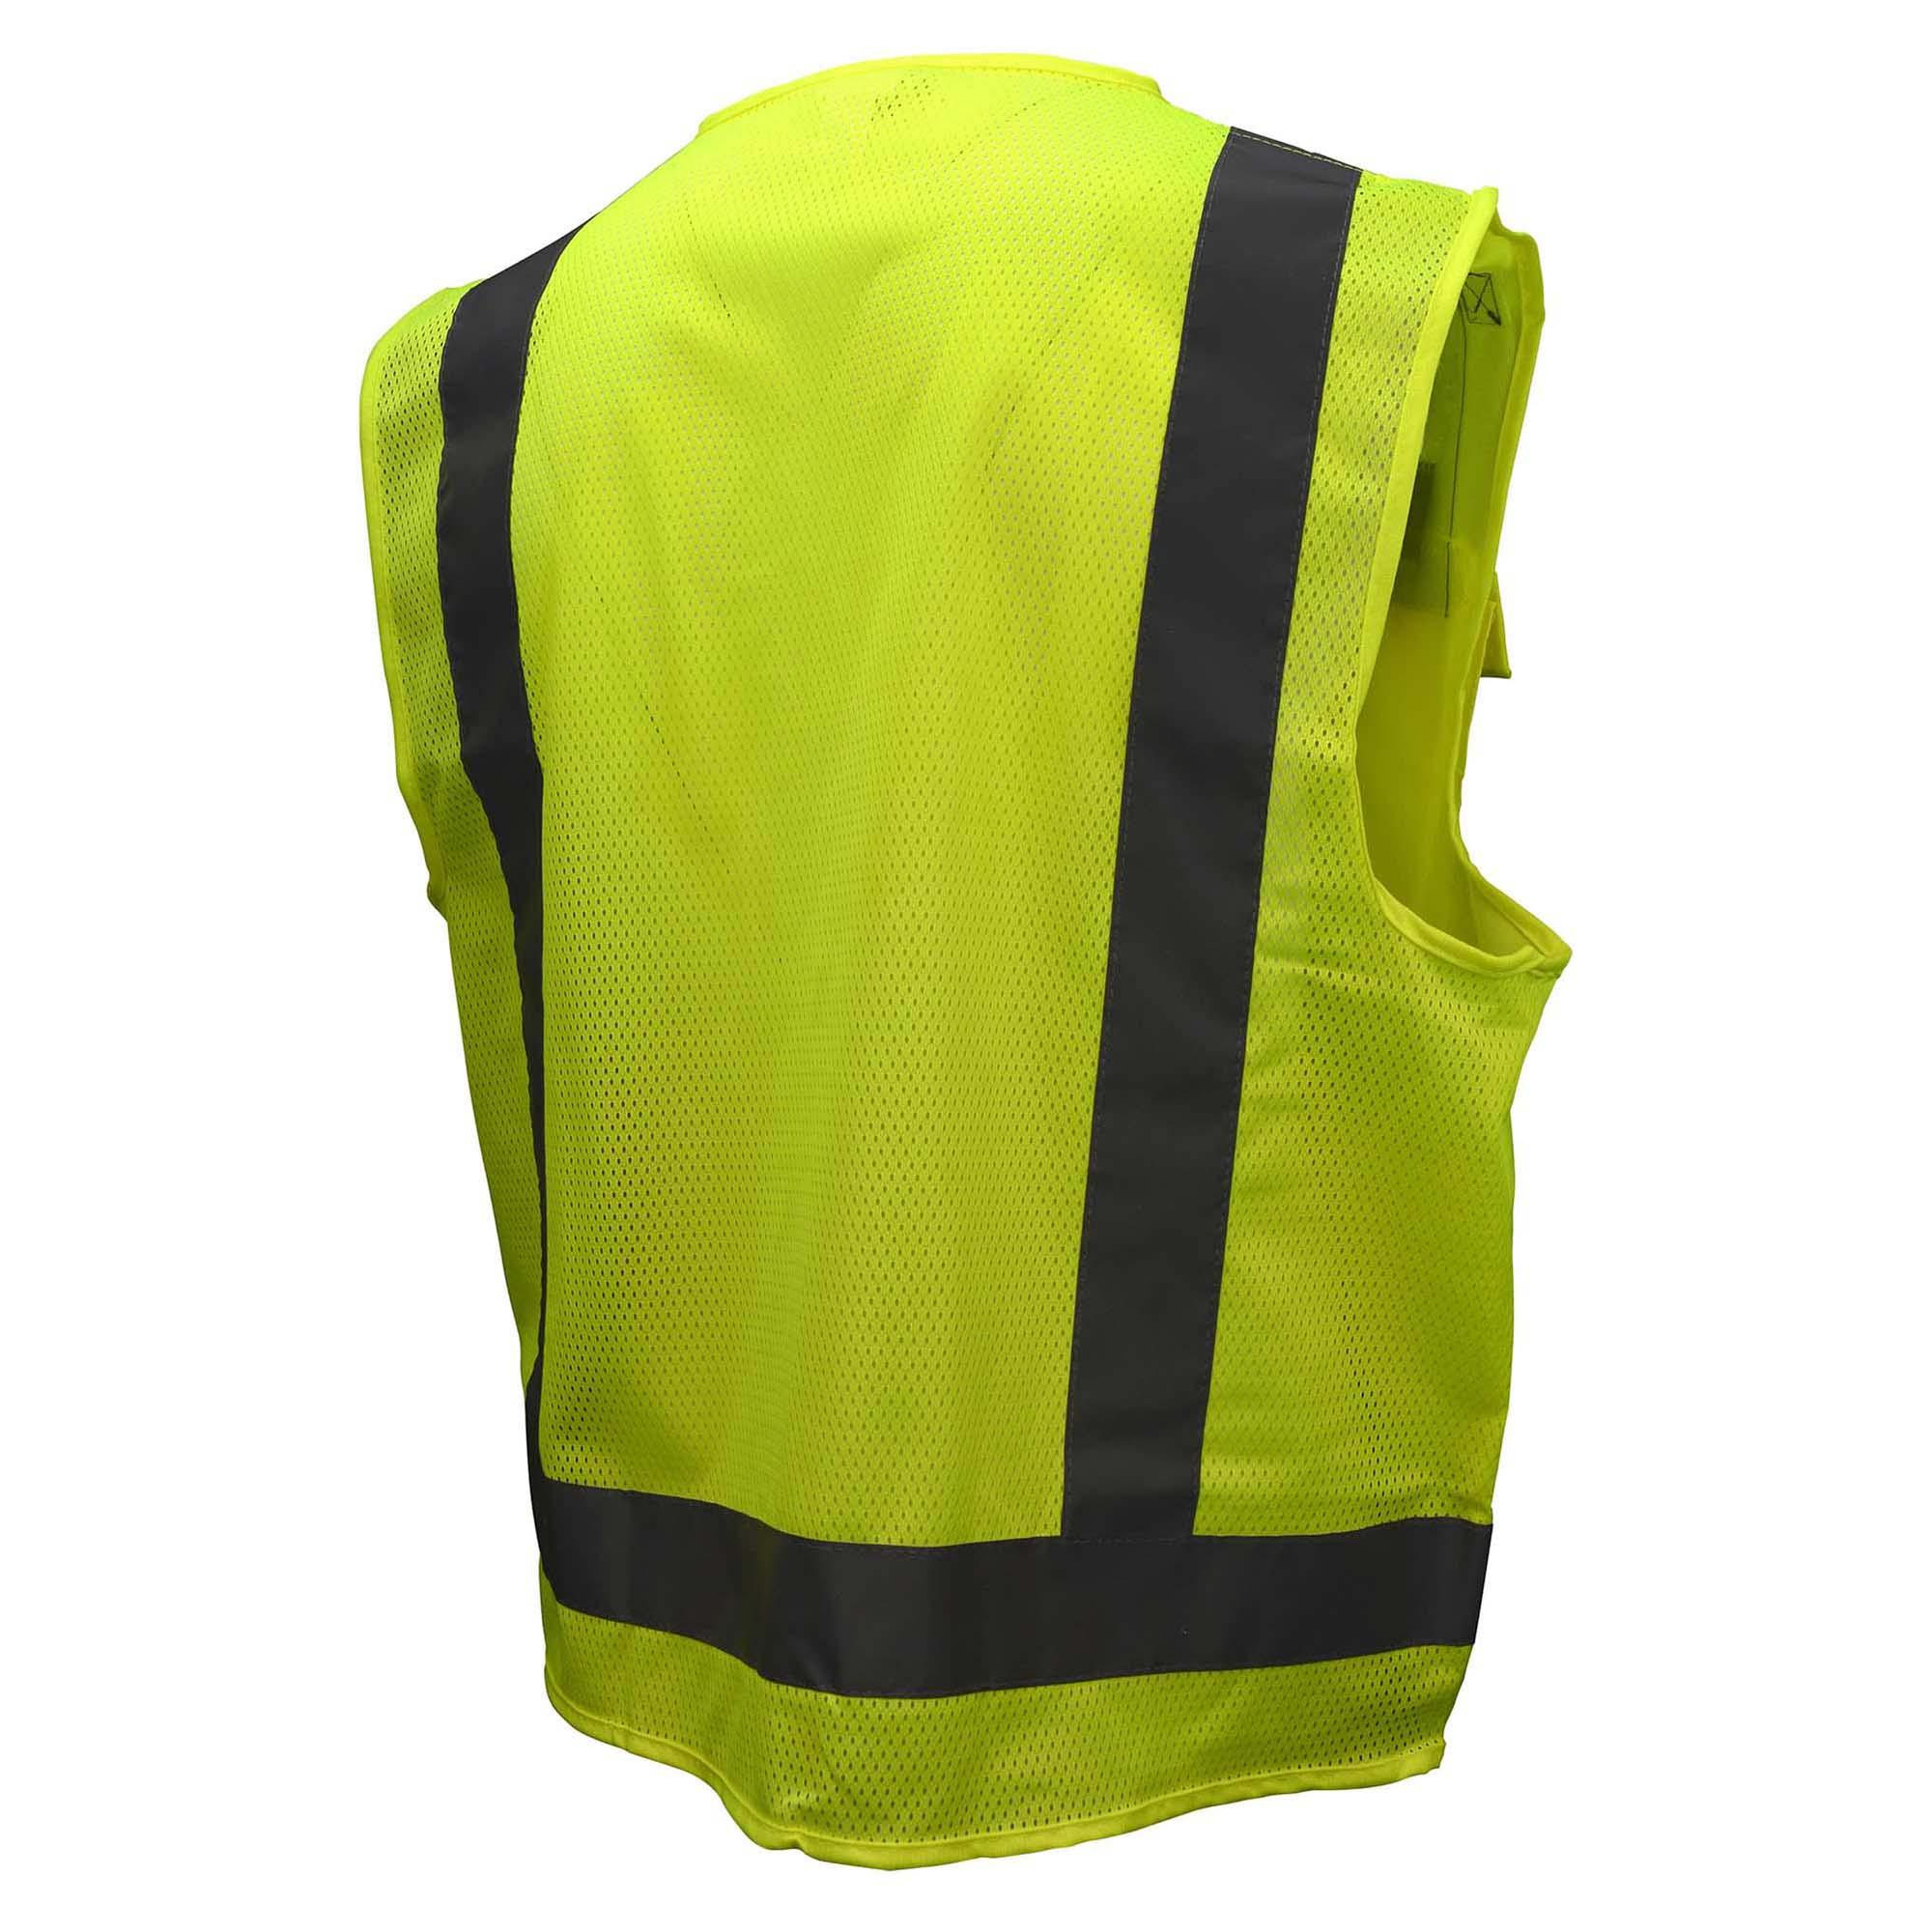 Radians SV7G Type R Class Surveyor Safety Vest Yellow/Lime Full Source